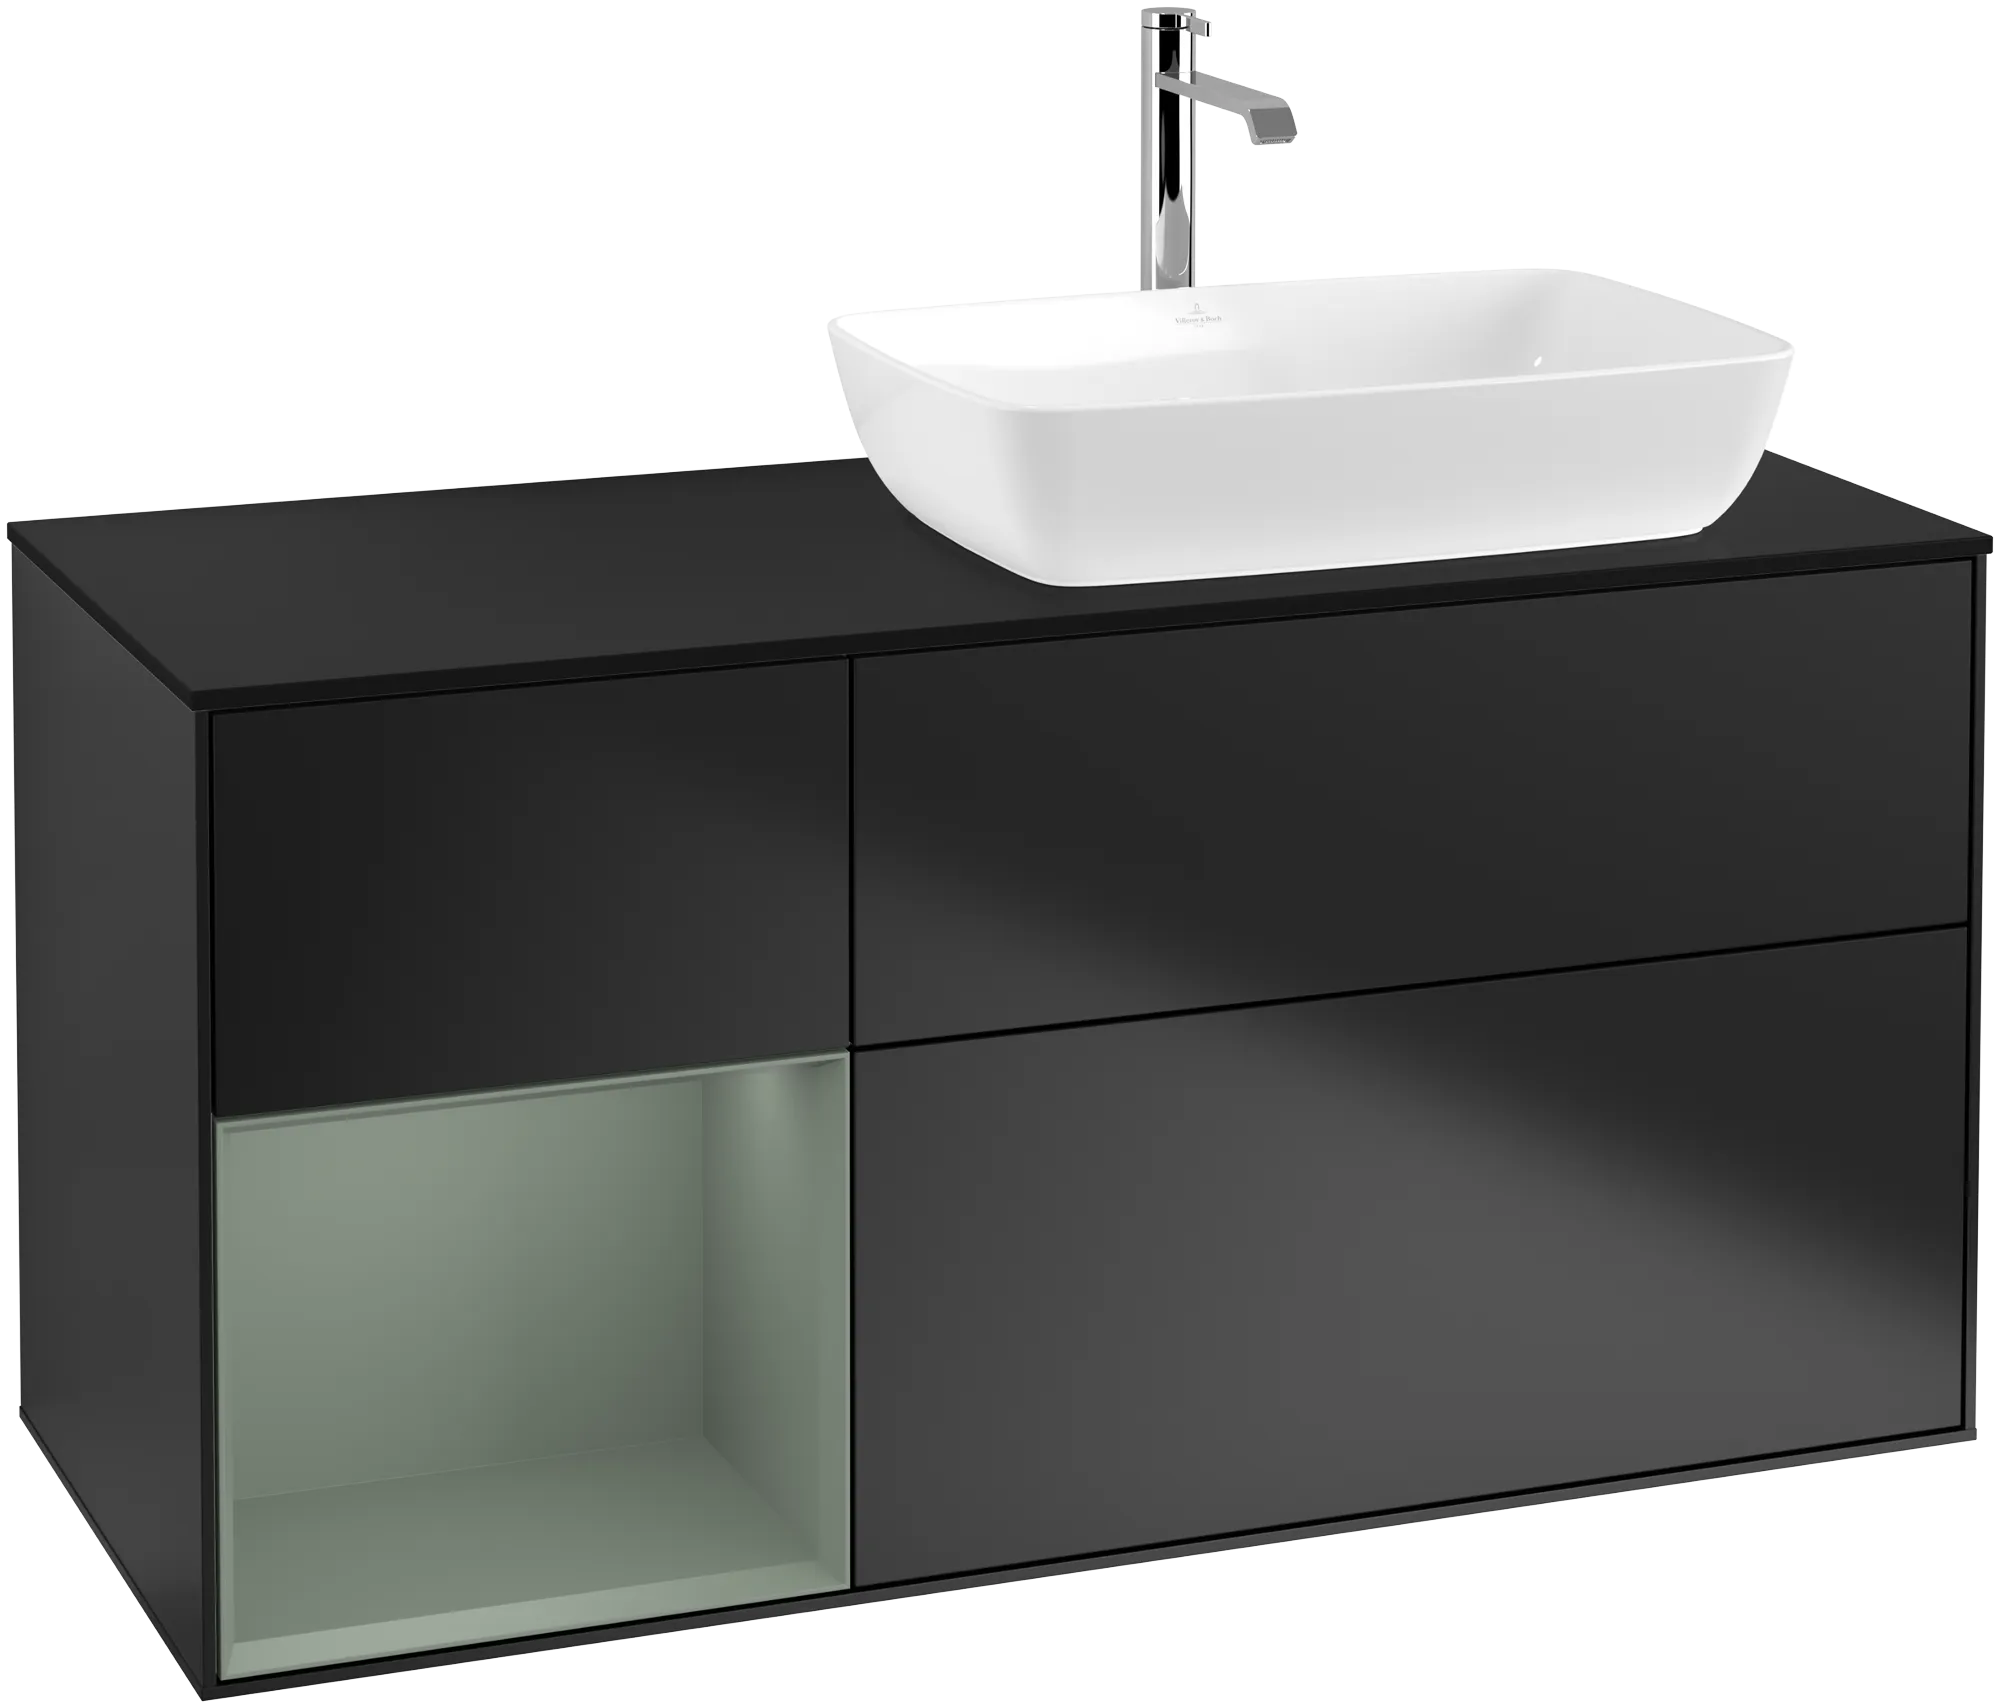 Obrázek VILLEROY BOCH Finion Vanity unit, with lighting, 3 pull-out compartments, 1200 x 603 x 501 mm, Black Matt Lacquer / Olive Matt Lacquer / Glass Black Matt #G802GMPD